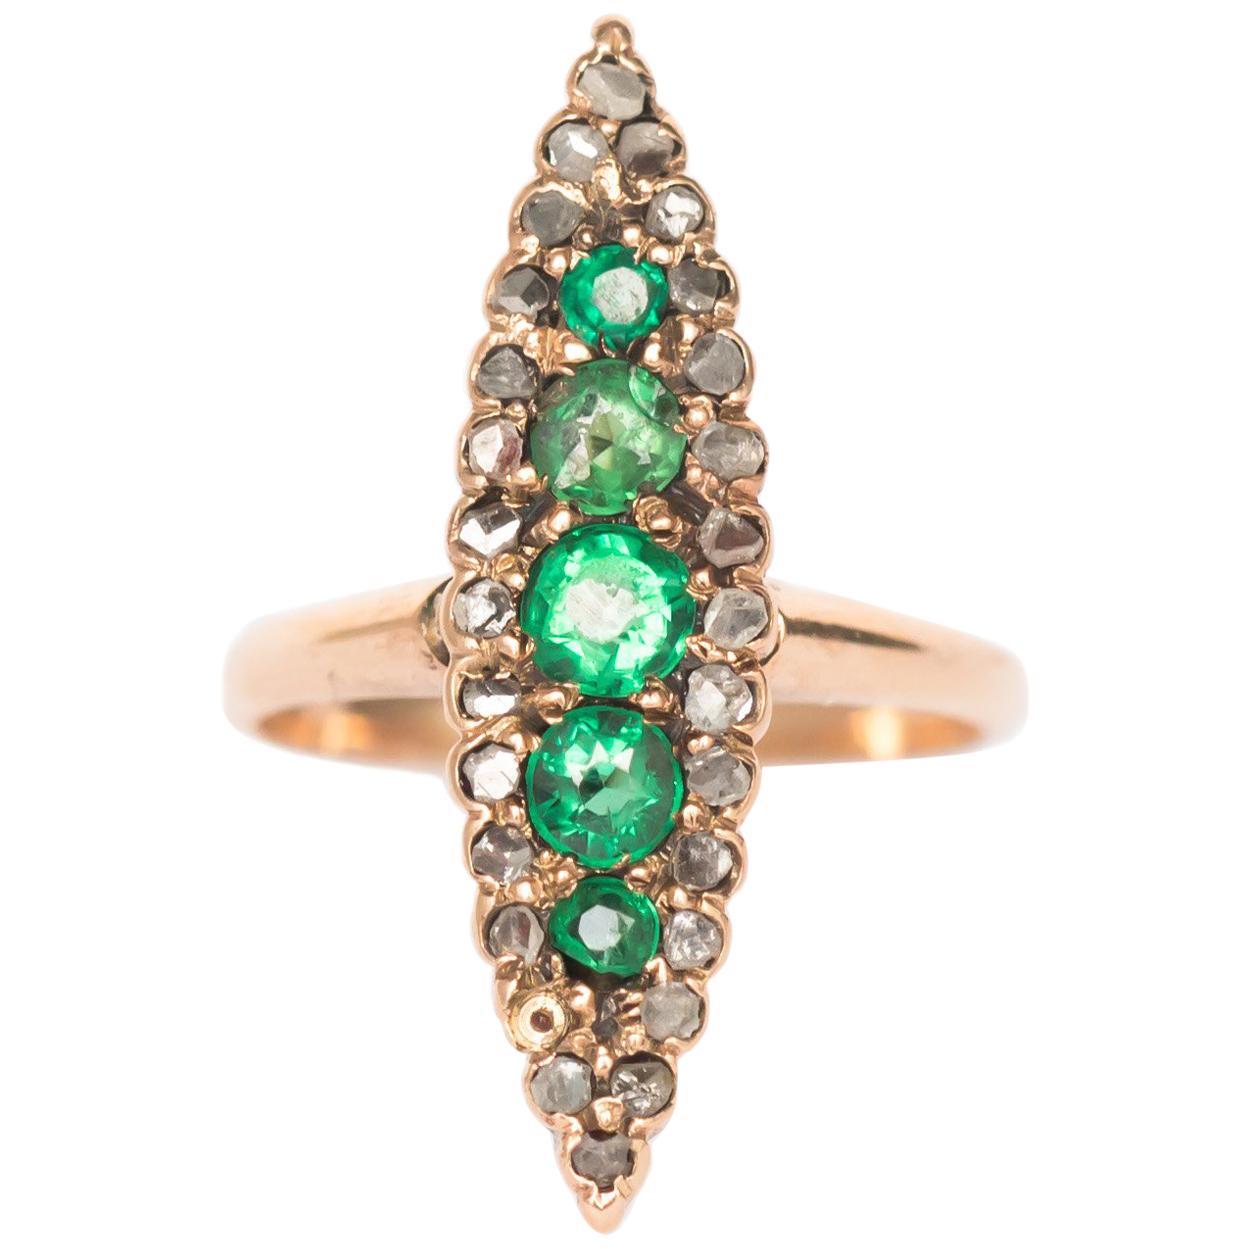 1880s Victorian 14 Karat Rose Gold Emerald and Diamond Cocktail Ring